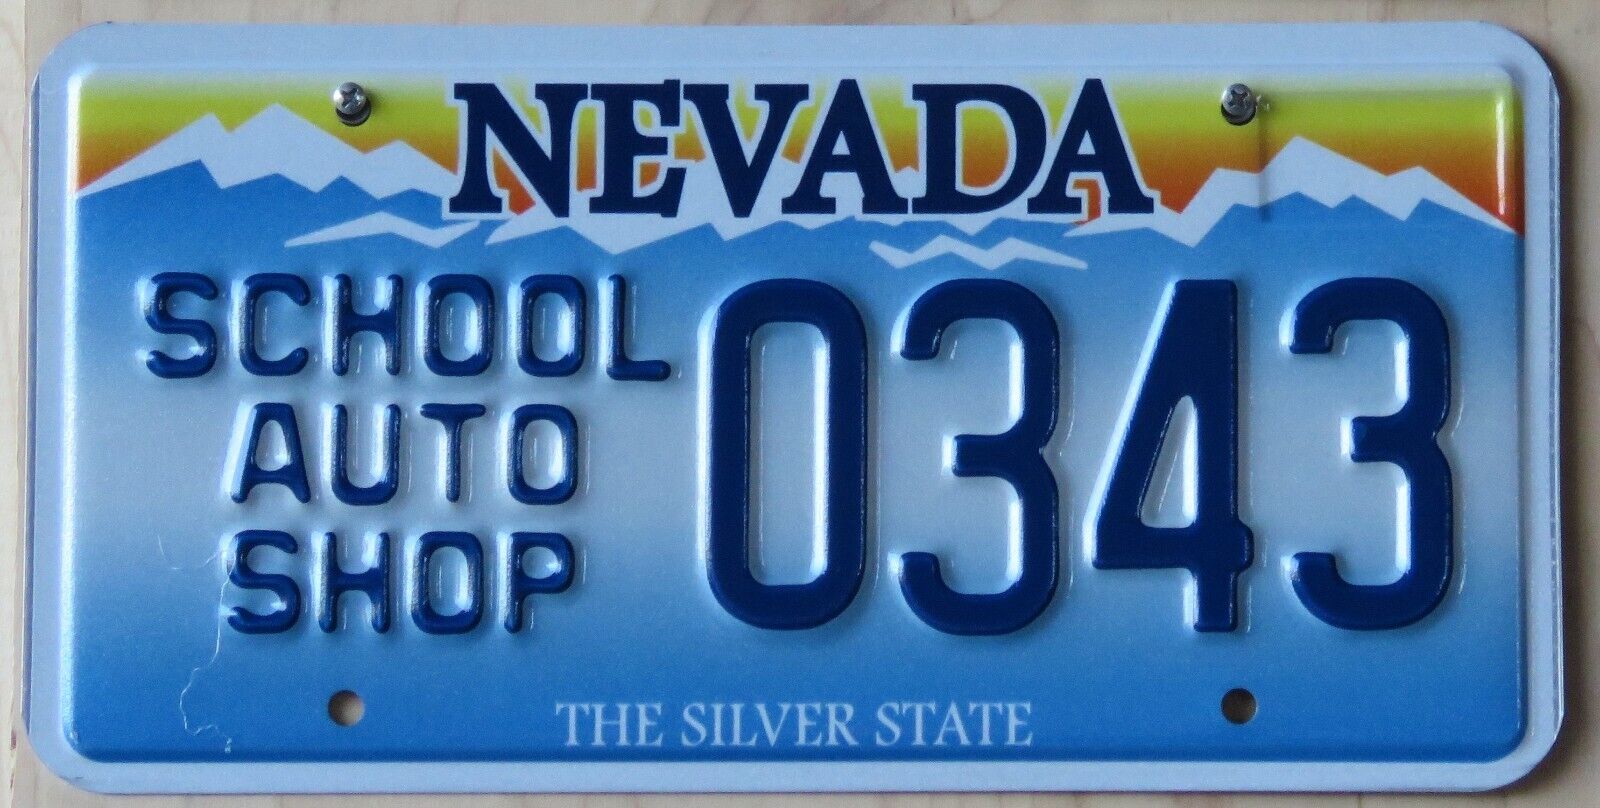 NEVADA  SCHOOL AUTO SHOP  license plate  2010    single plate offered